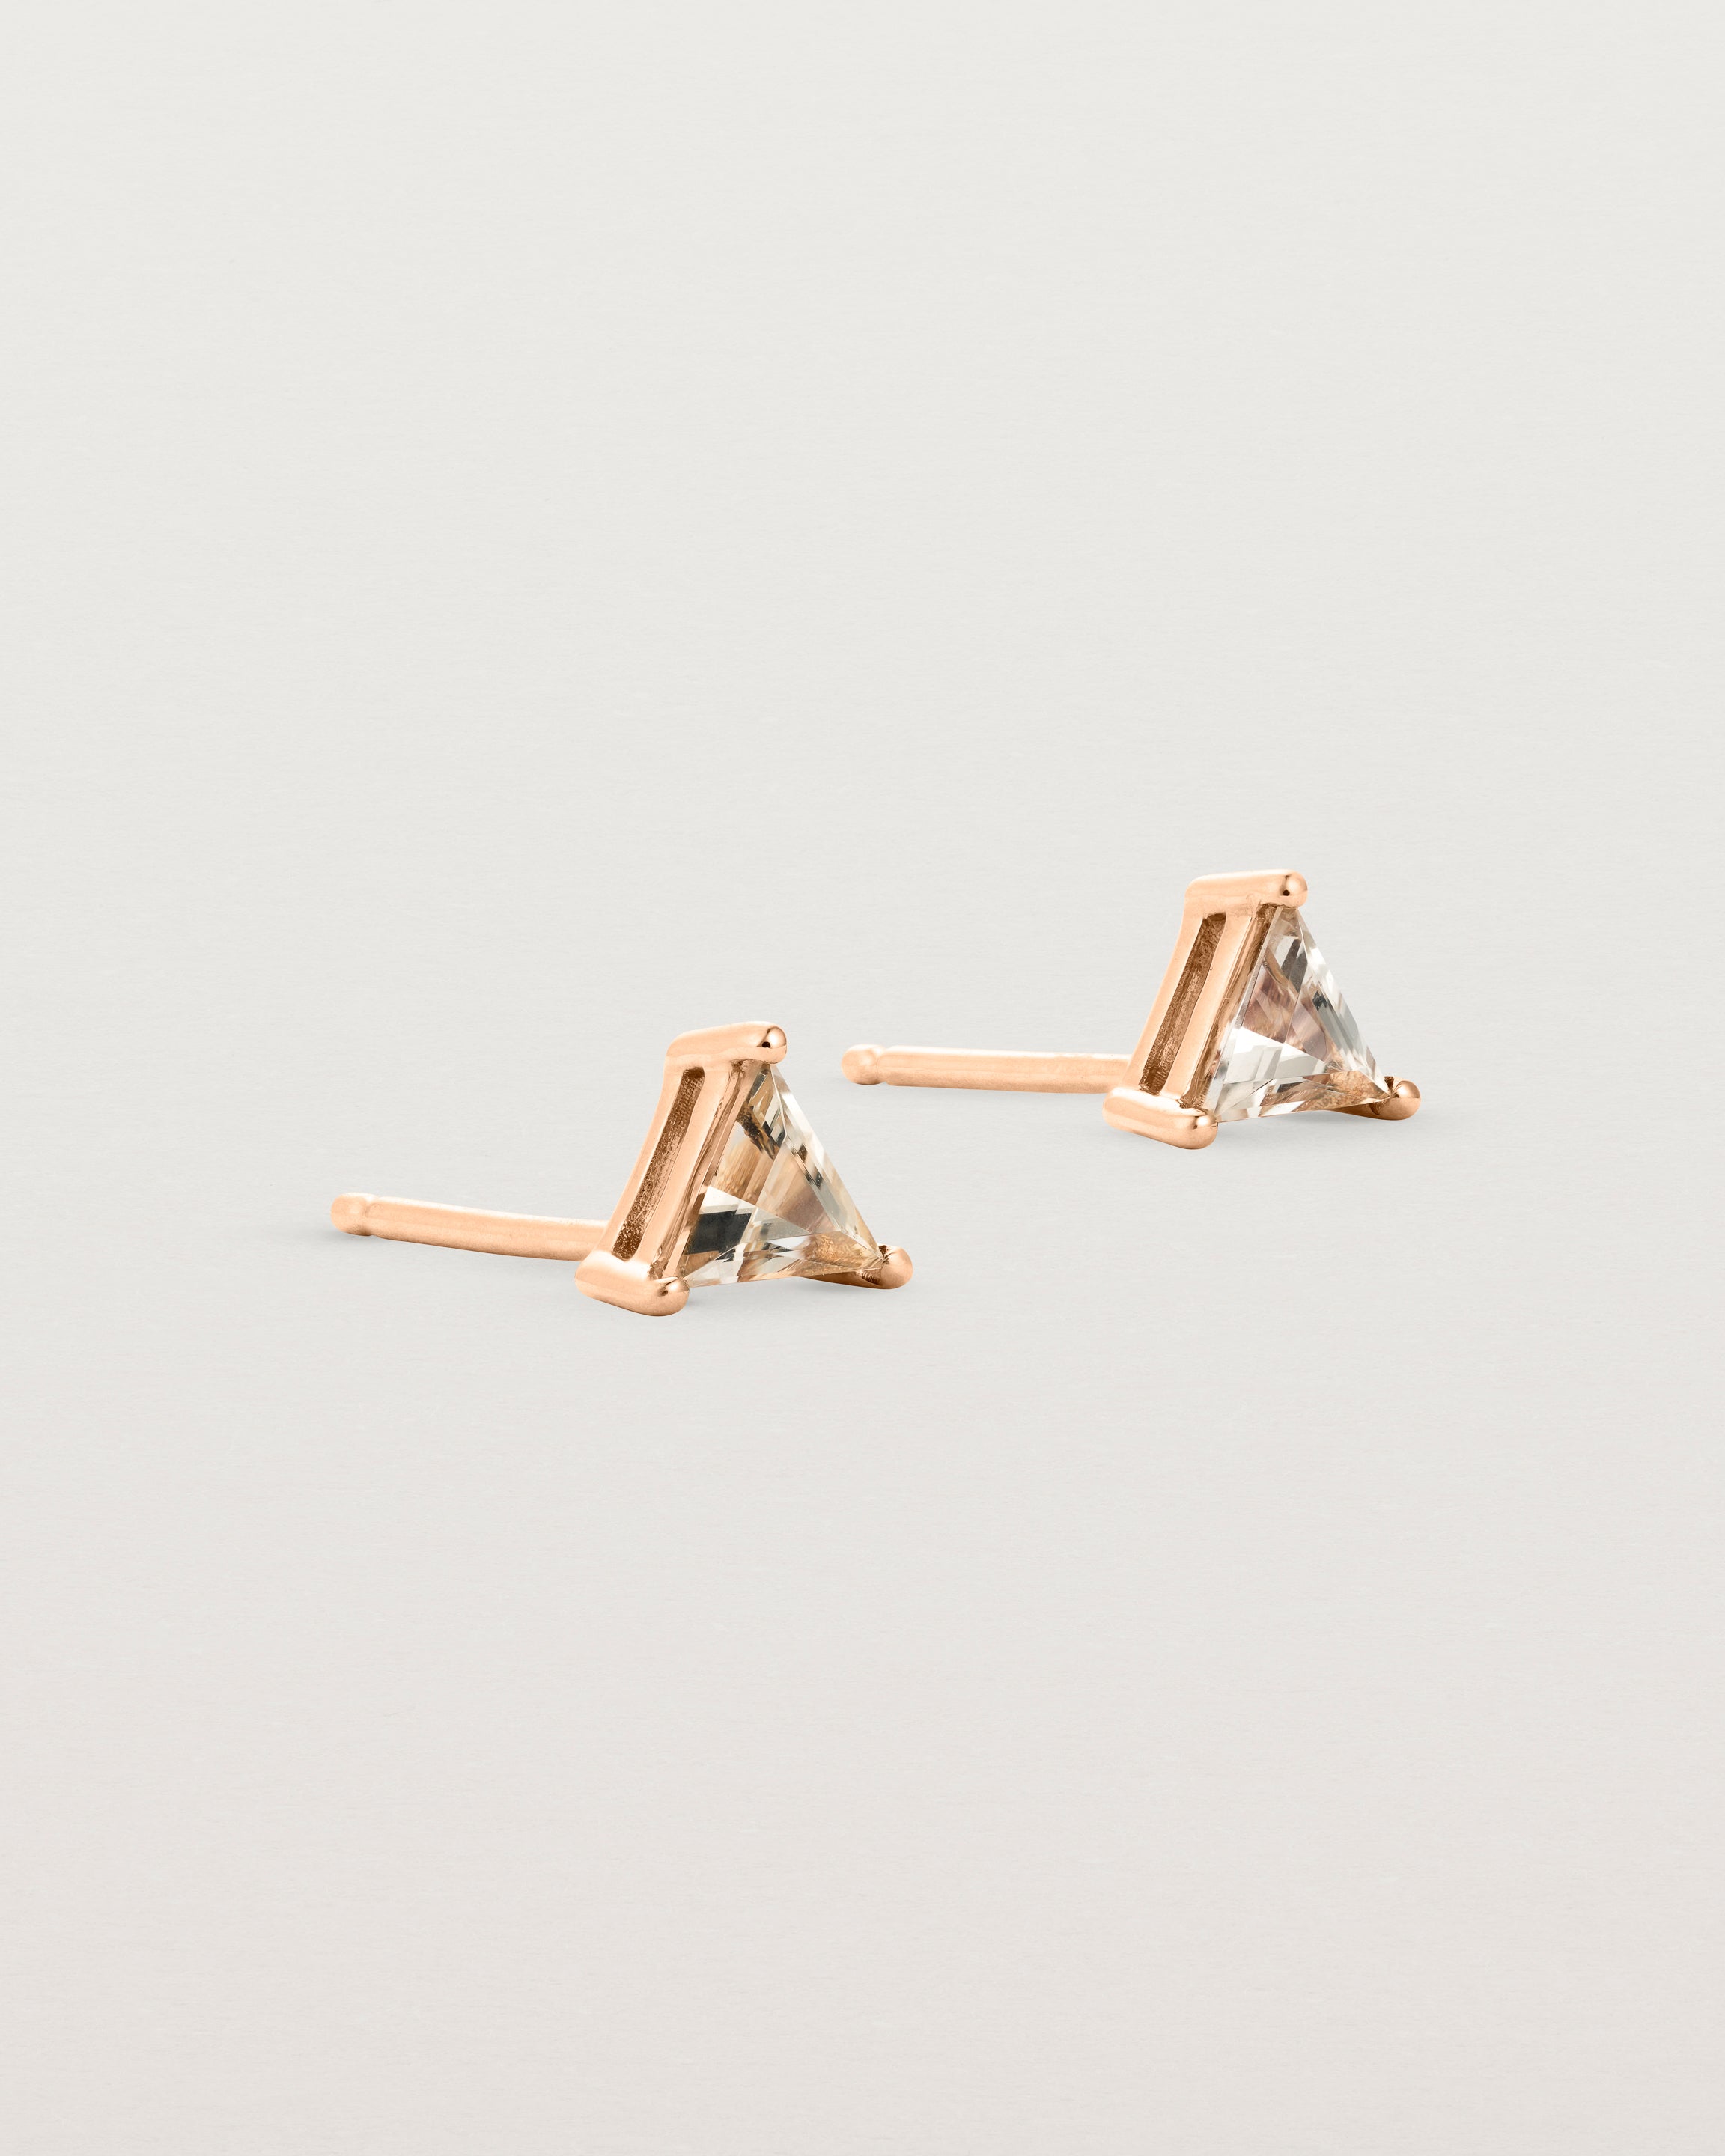 A pair of rose gold studs featuring a triangle shaped light yellow rutilated quartz